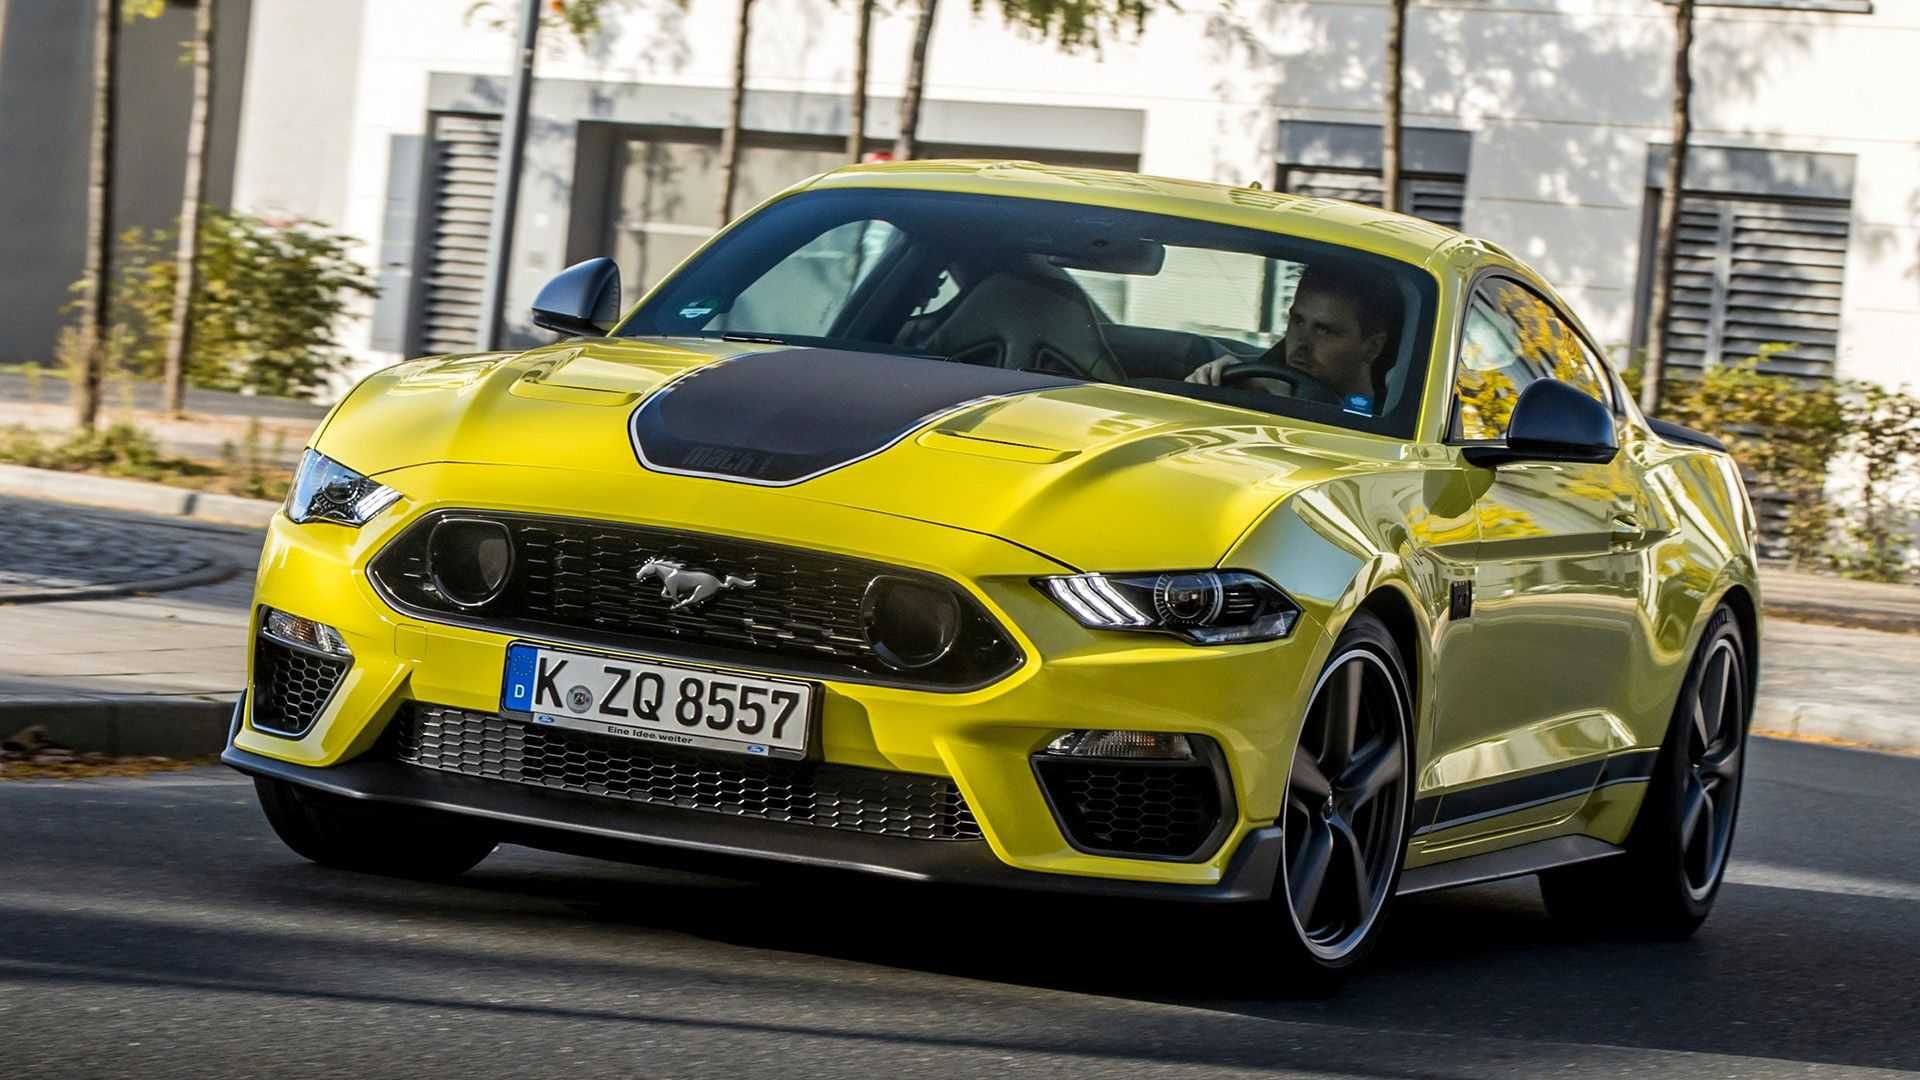 This Is Why Ford Mustangs Retain Their Value So Well Over Time